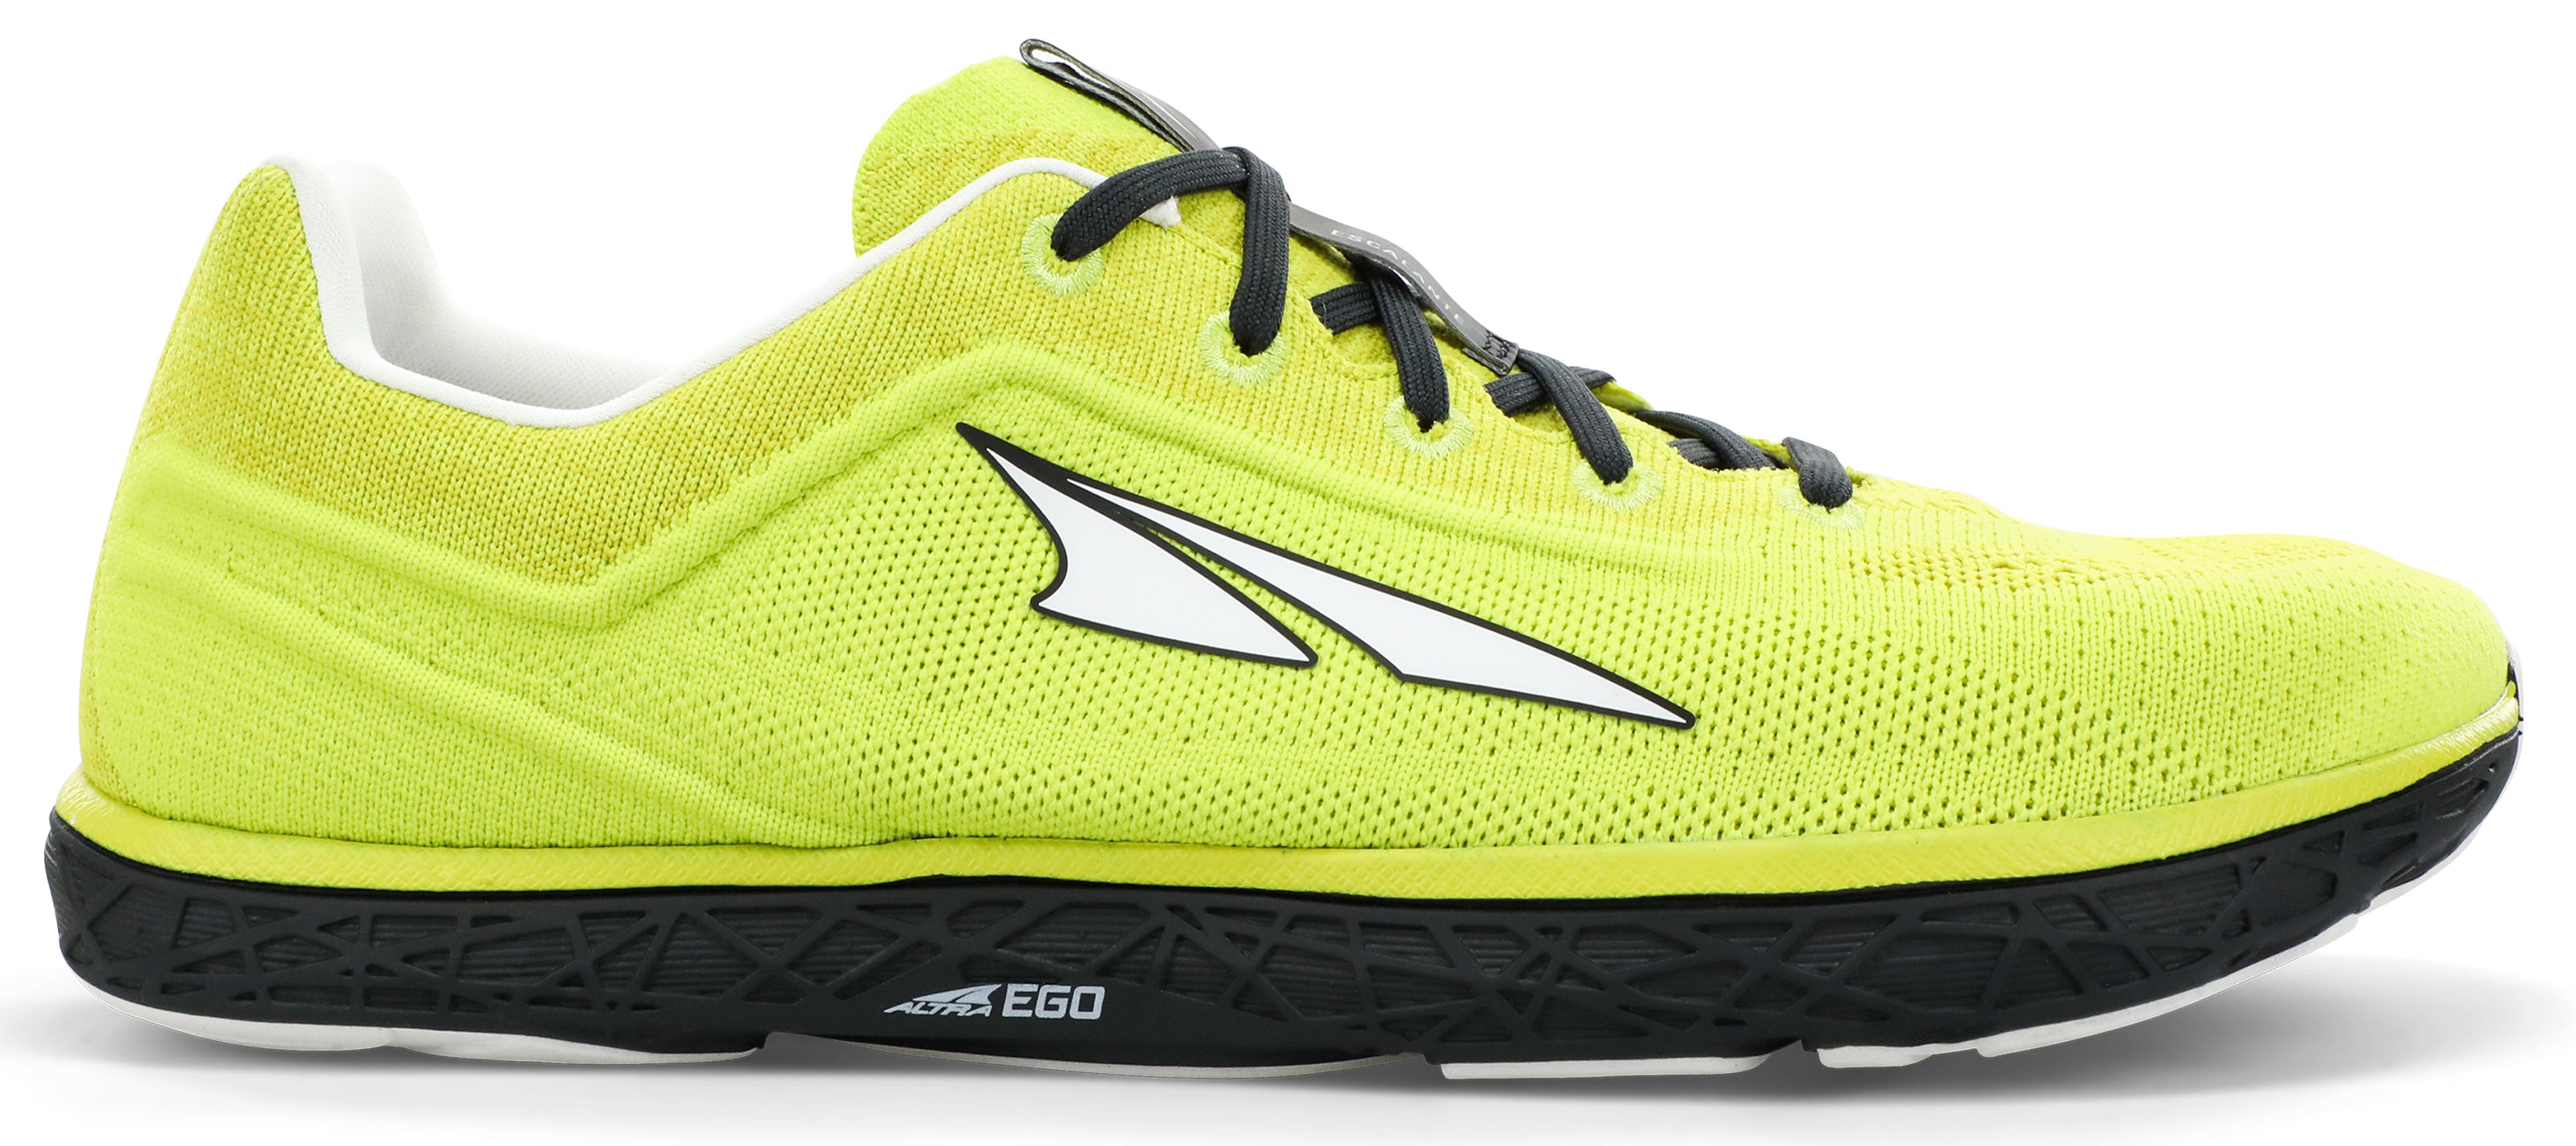 Altra Men's Escalante 2.5 Road Running Shoe in Lime/Black from the side